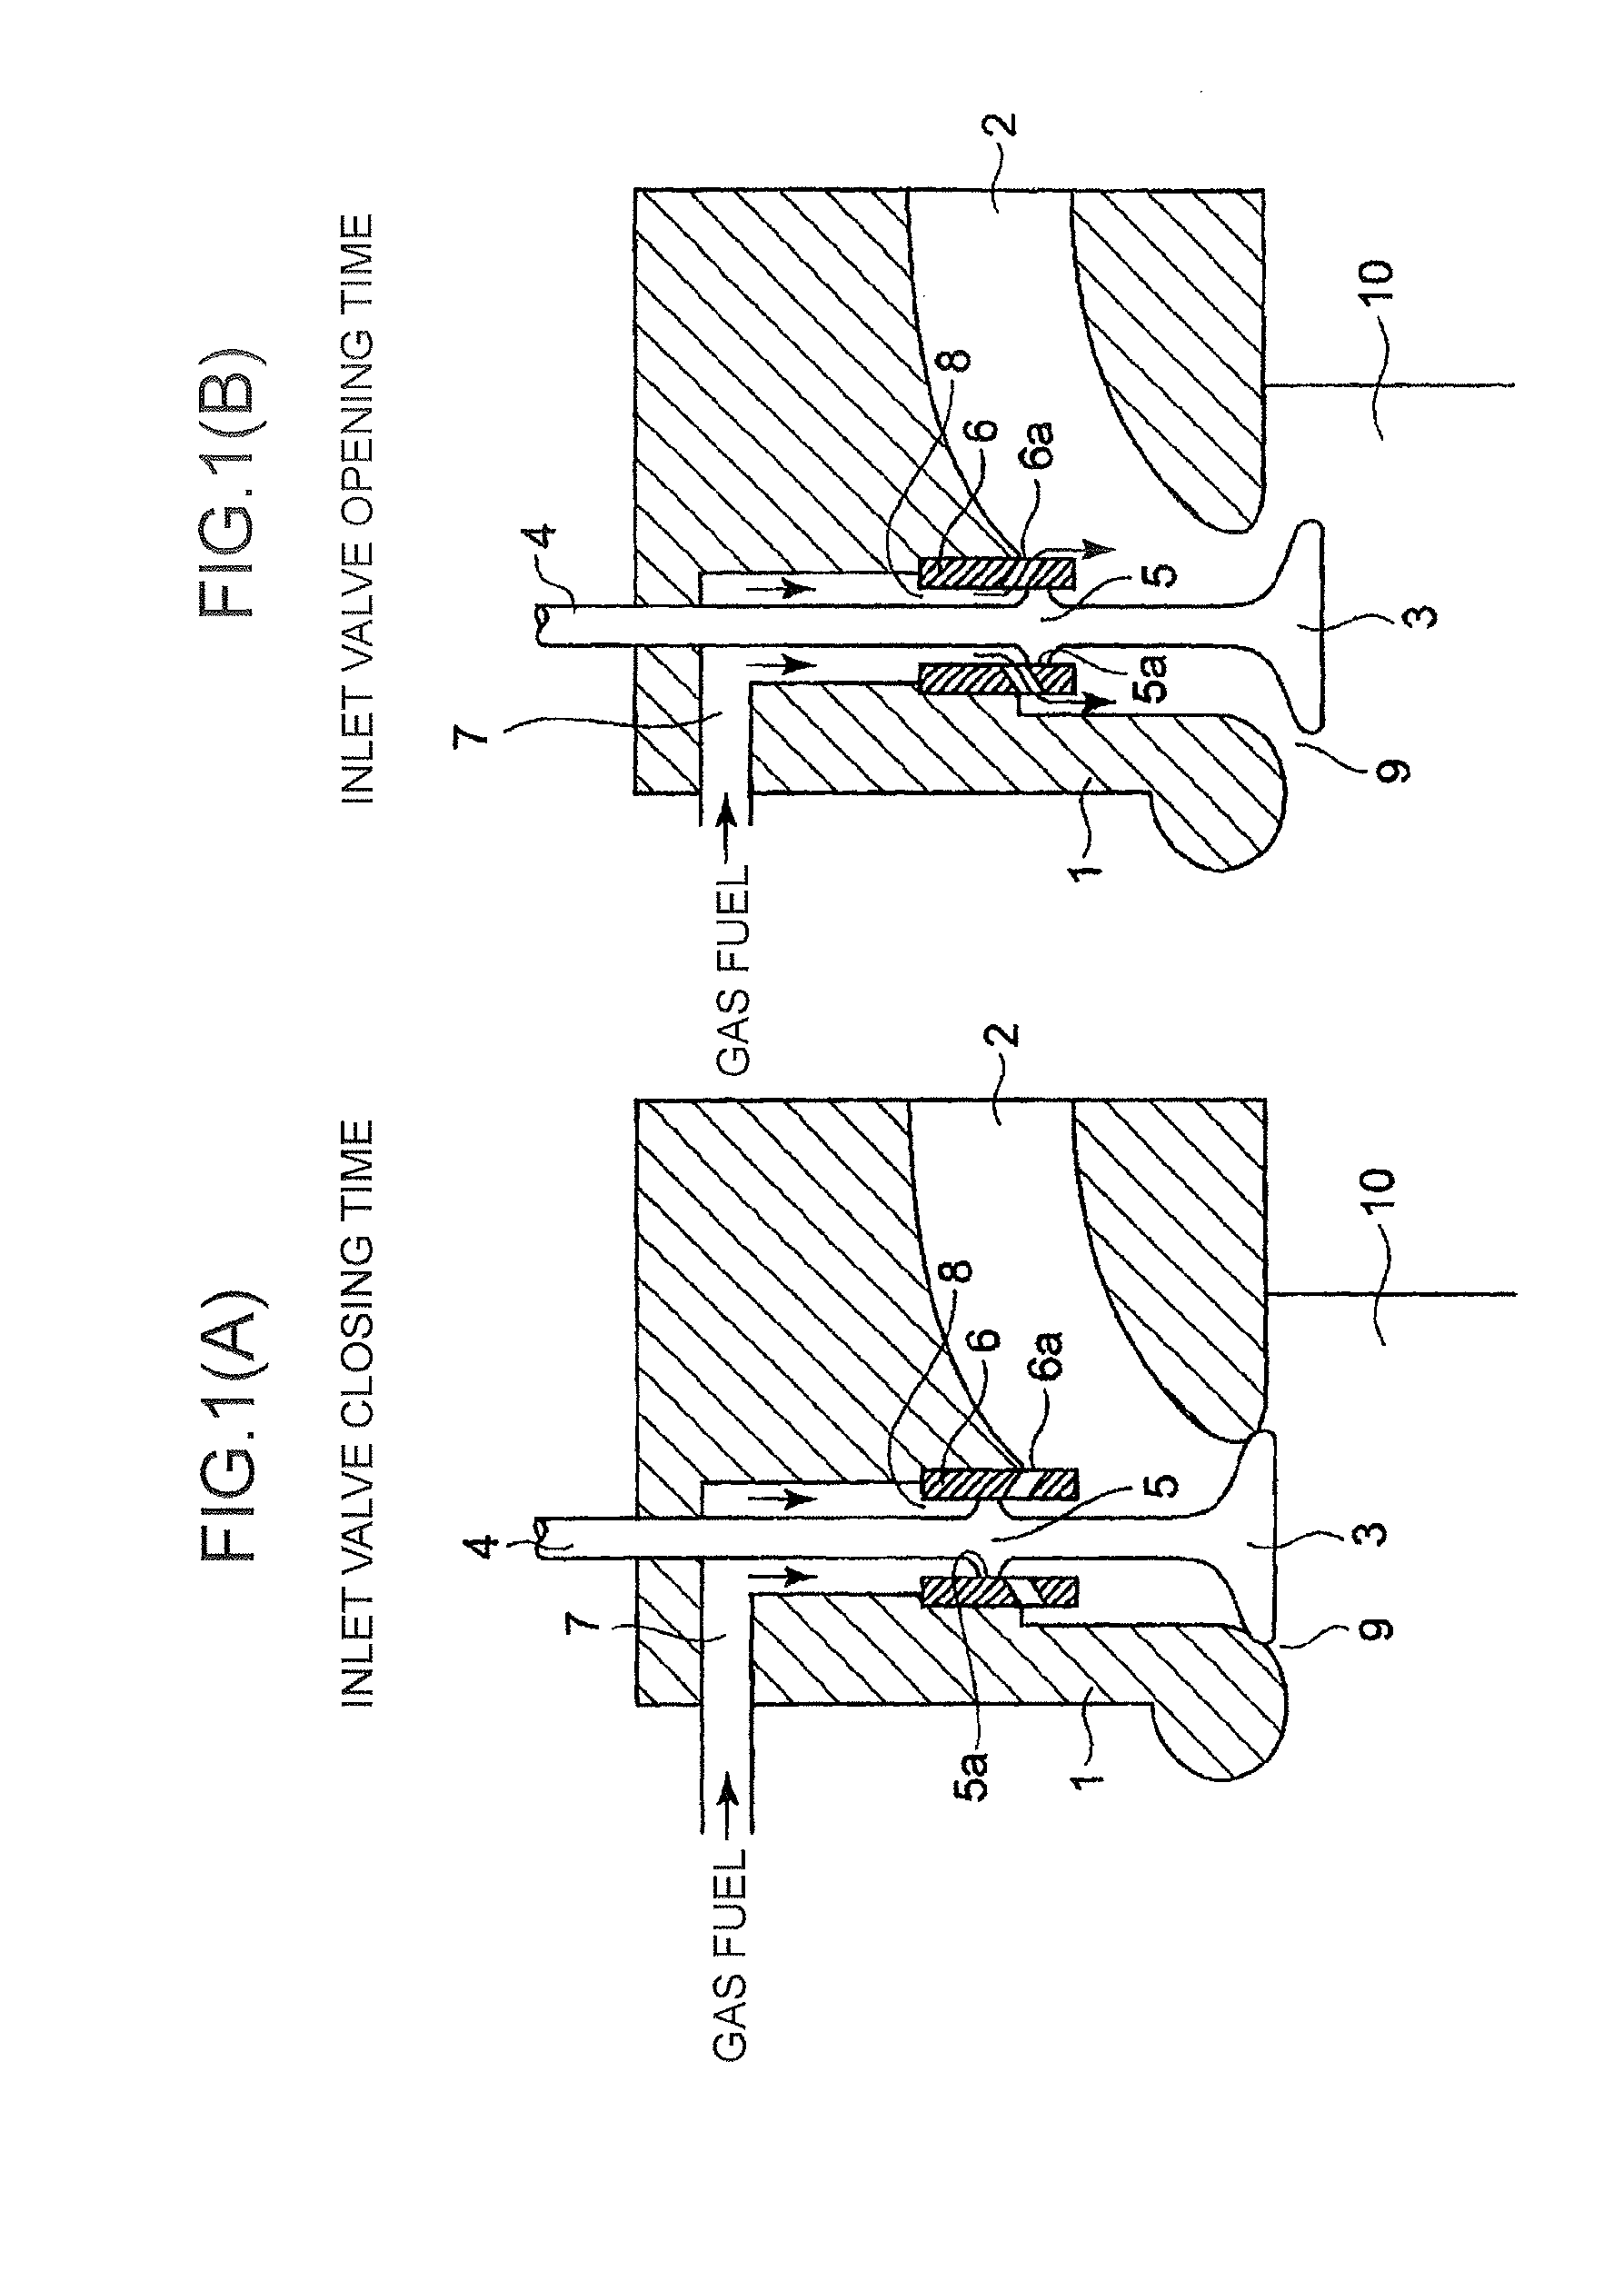 Fuel gas supply device for gas engine